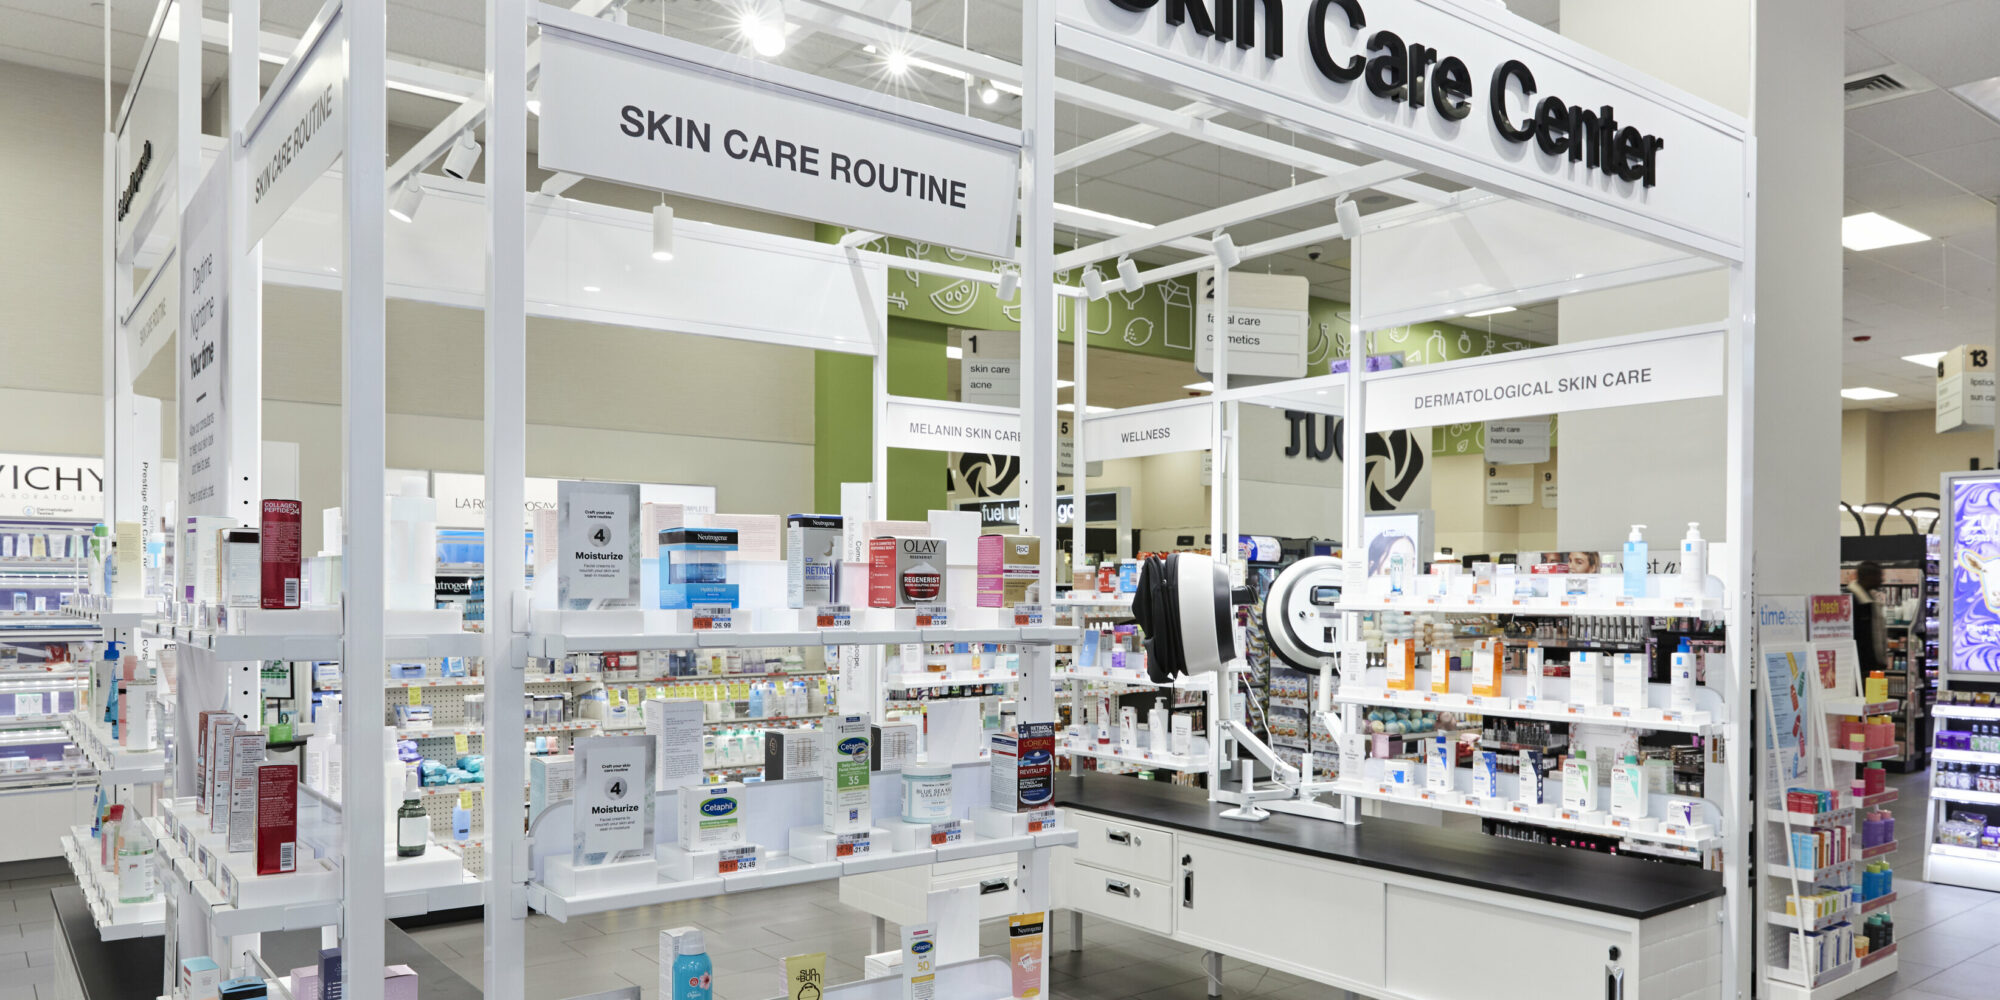 “Bullish About Beauty”: How CVS Is Investing In Its Beauty Business To Grow Retail Sales